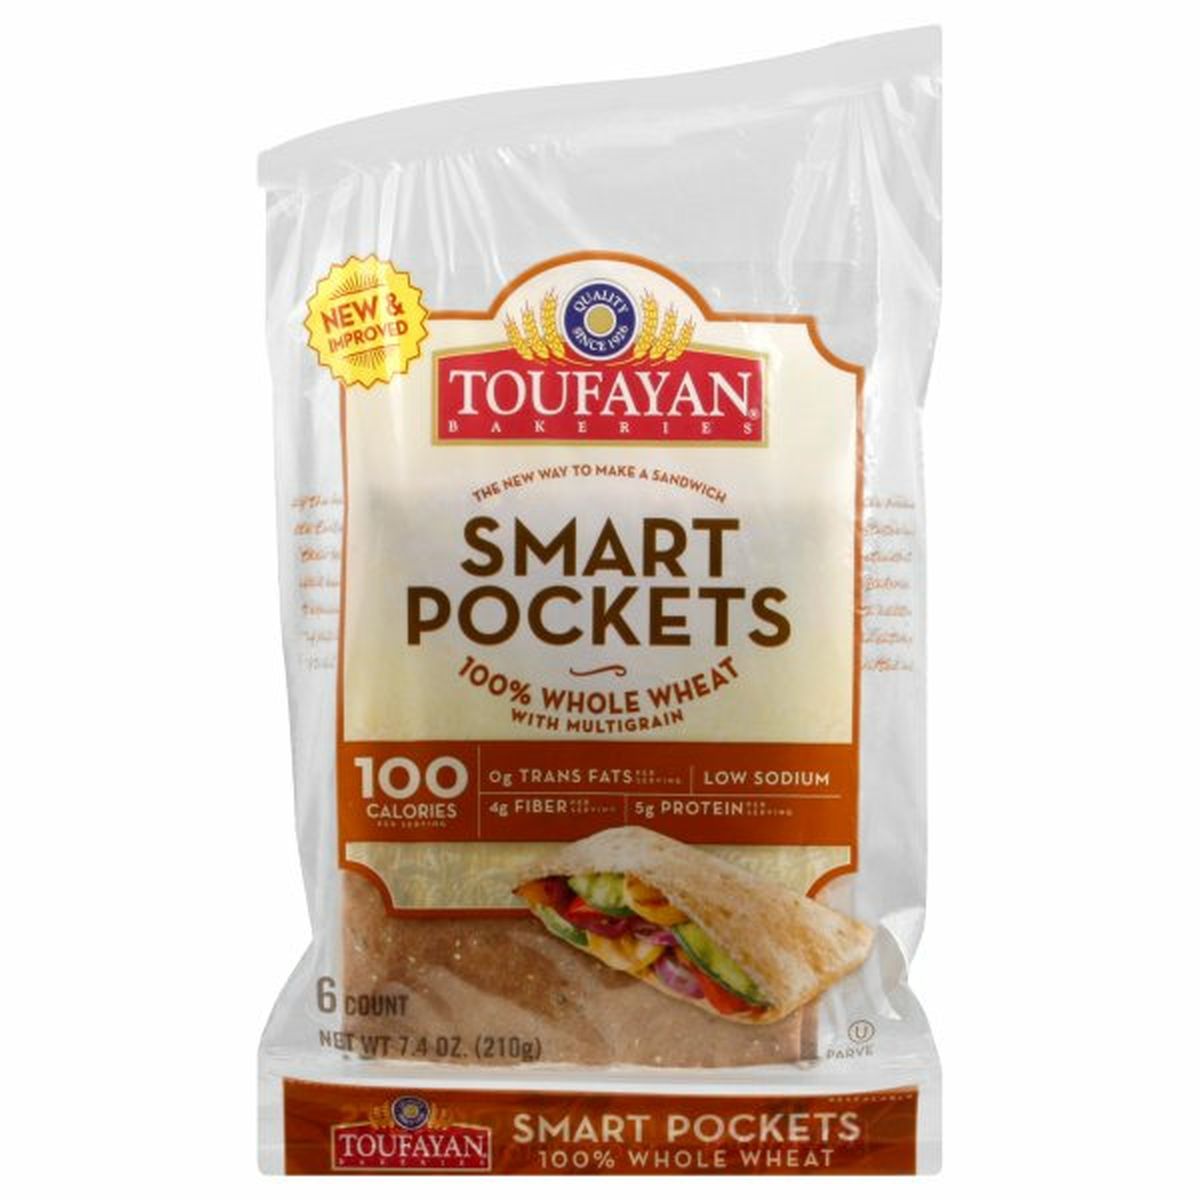 Calories in Toufayan Smart Pockets, 100% Whole Wheat